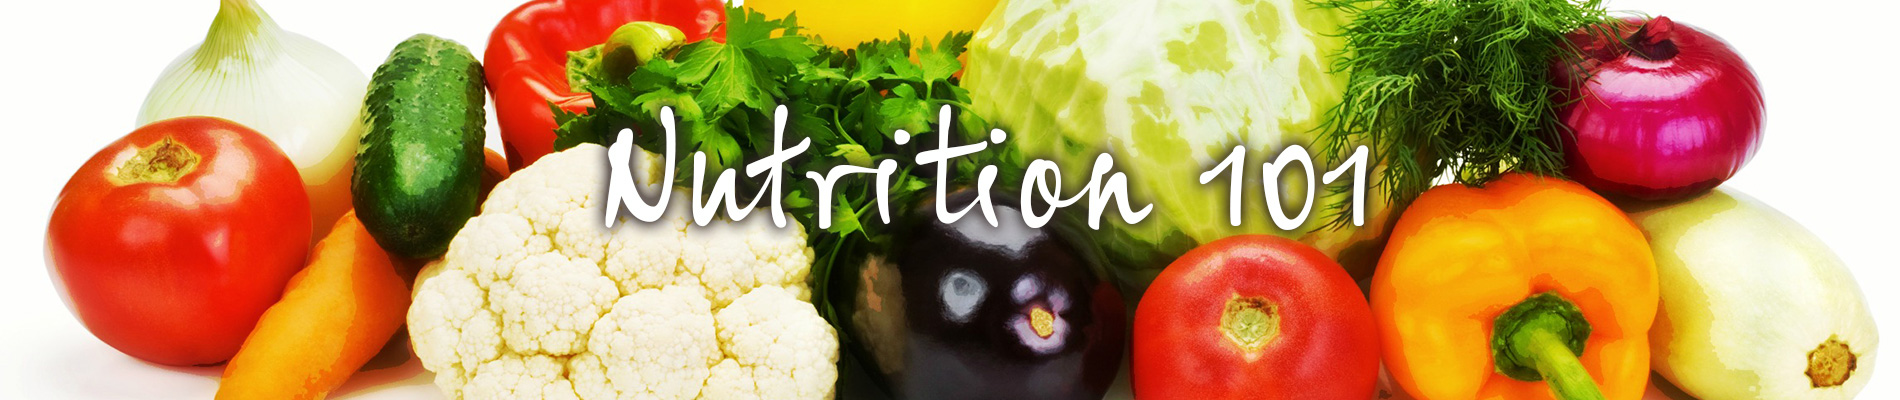 Nutrition-101